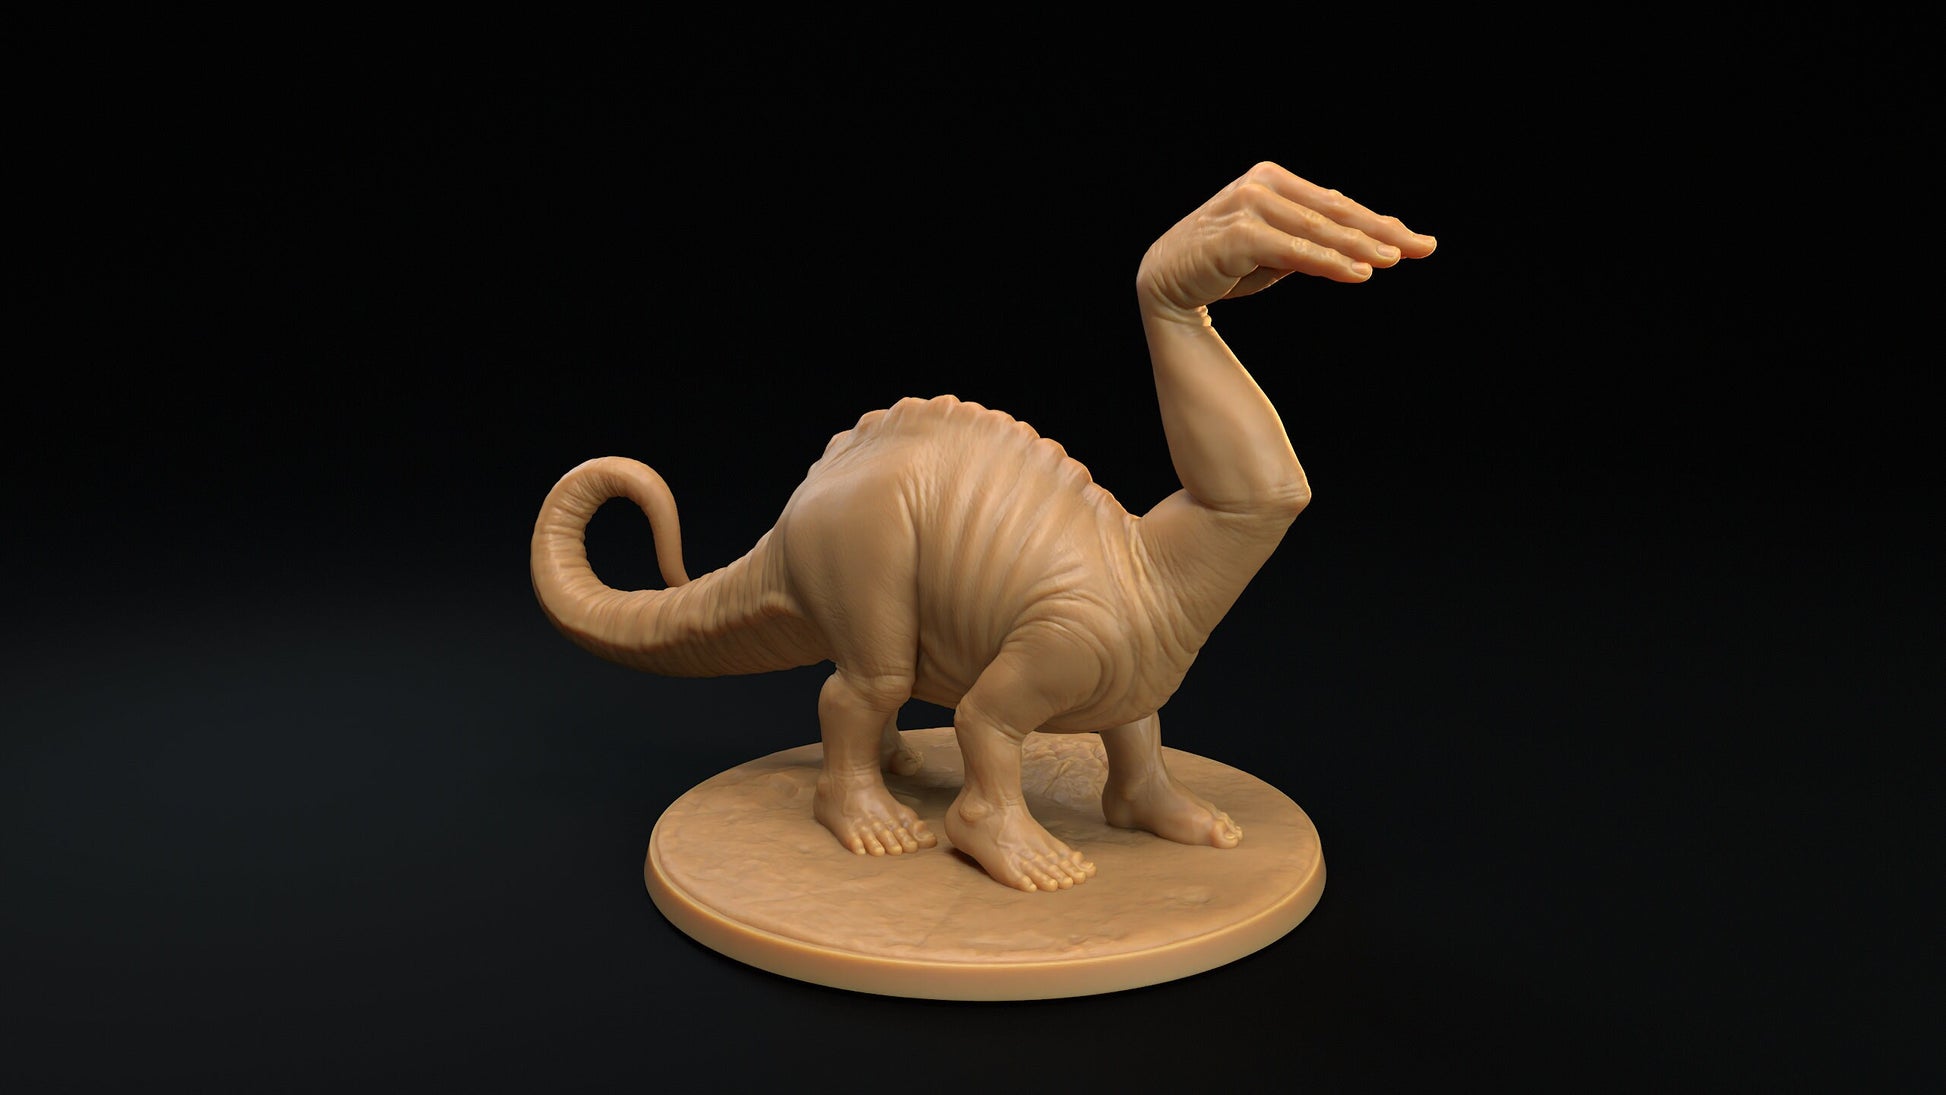 Phalangesaurus | RPG Miniature for Dungeons and Dragons|Pathfinder|Tabletop Wargaming | Monster Miniature | Dragon Trappers Lodge